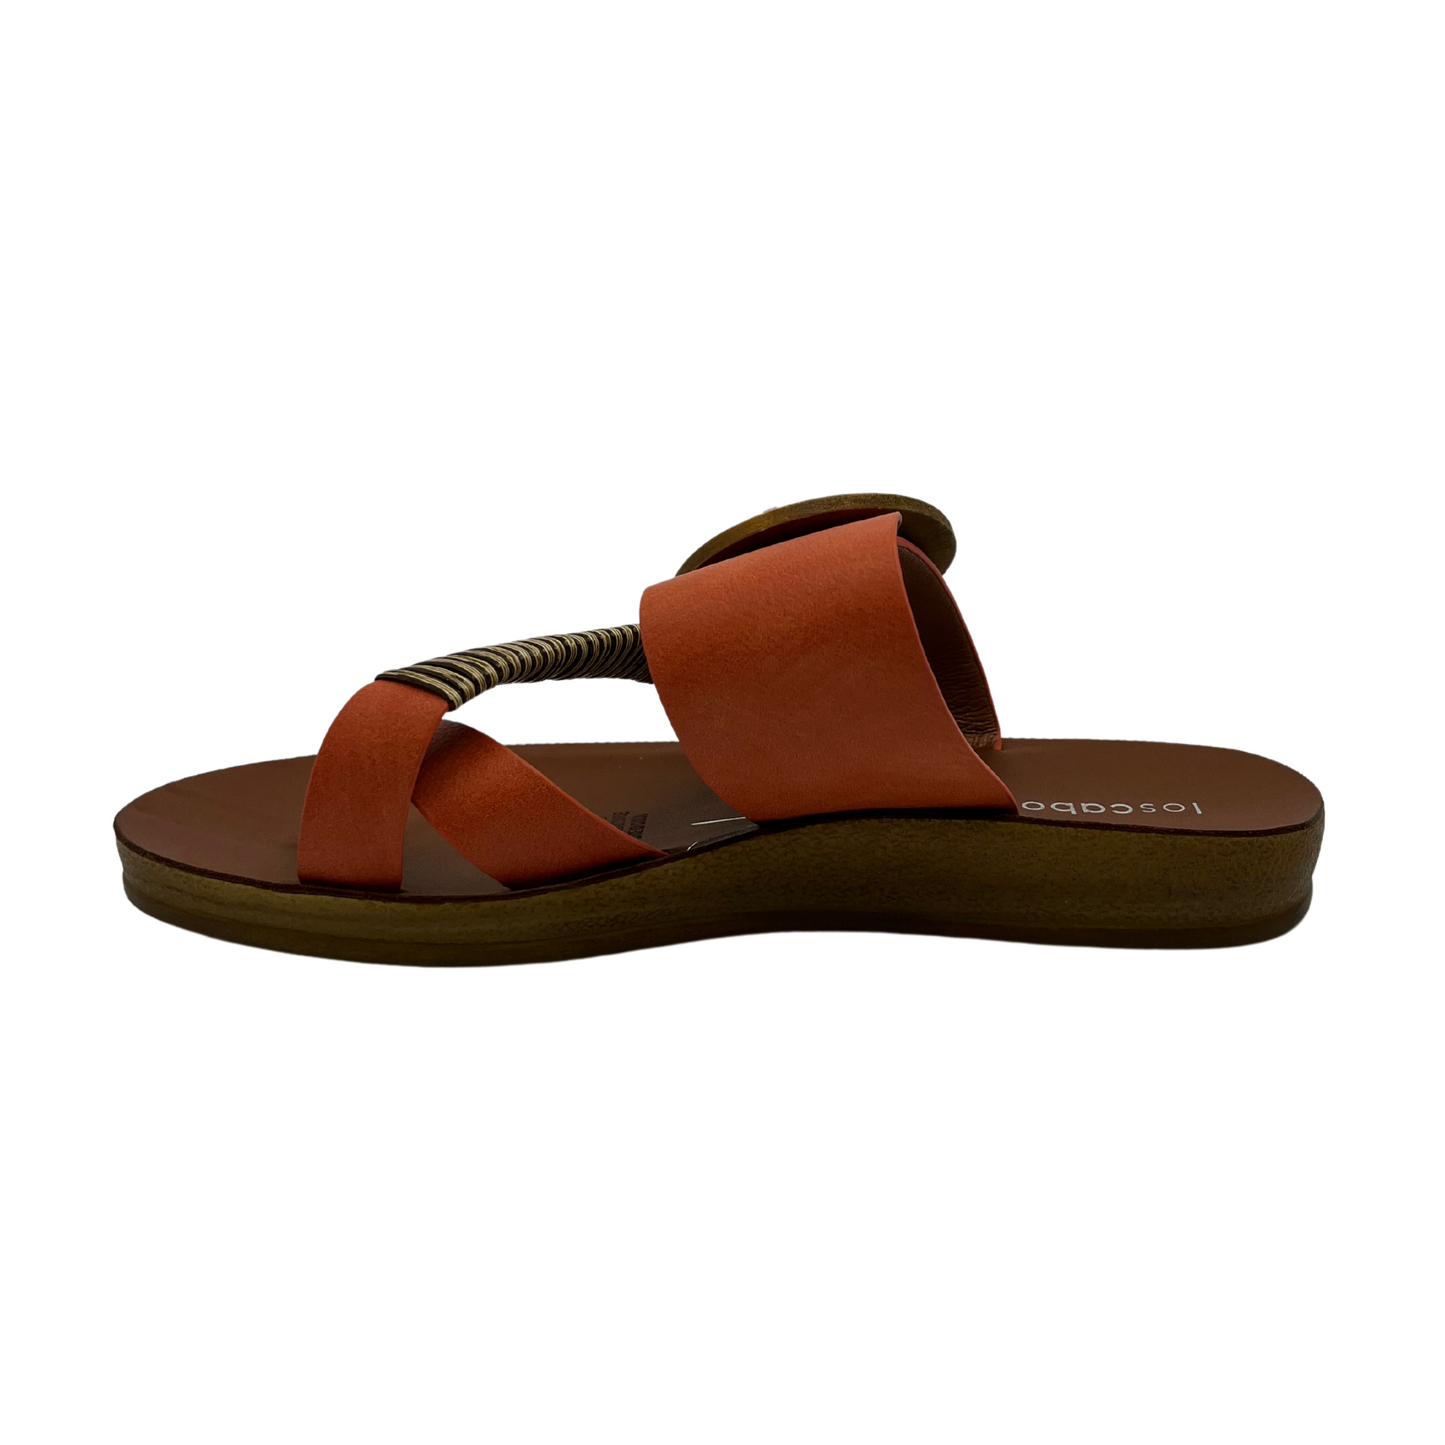 Left facing view of orange strapped slip on sandal. Featuring a wooden buckle and bamboo wrap on the toe strap.